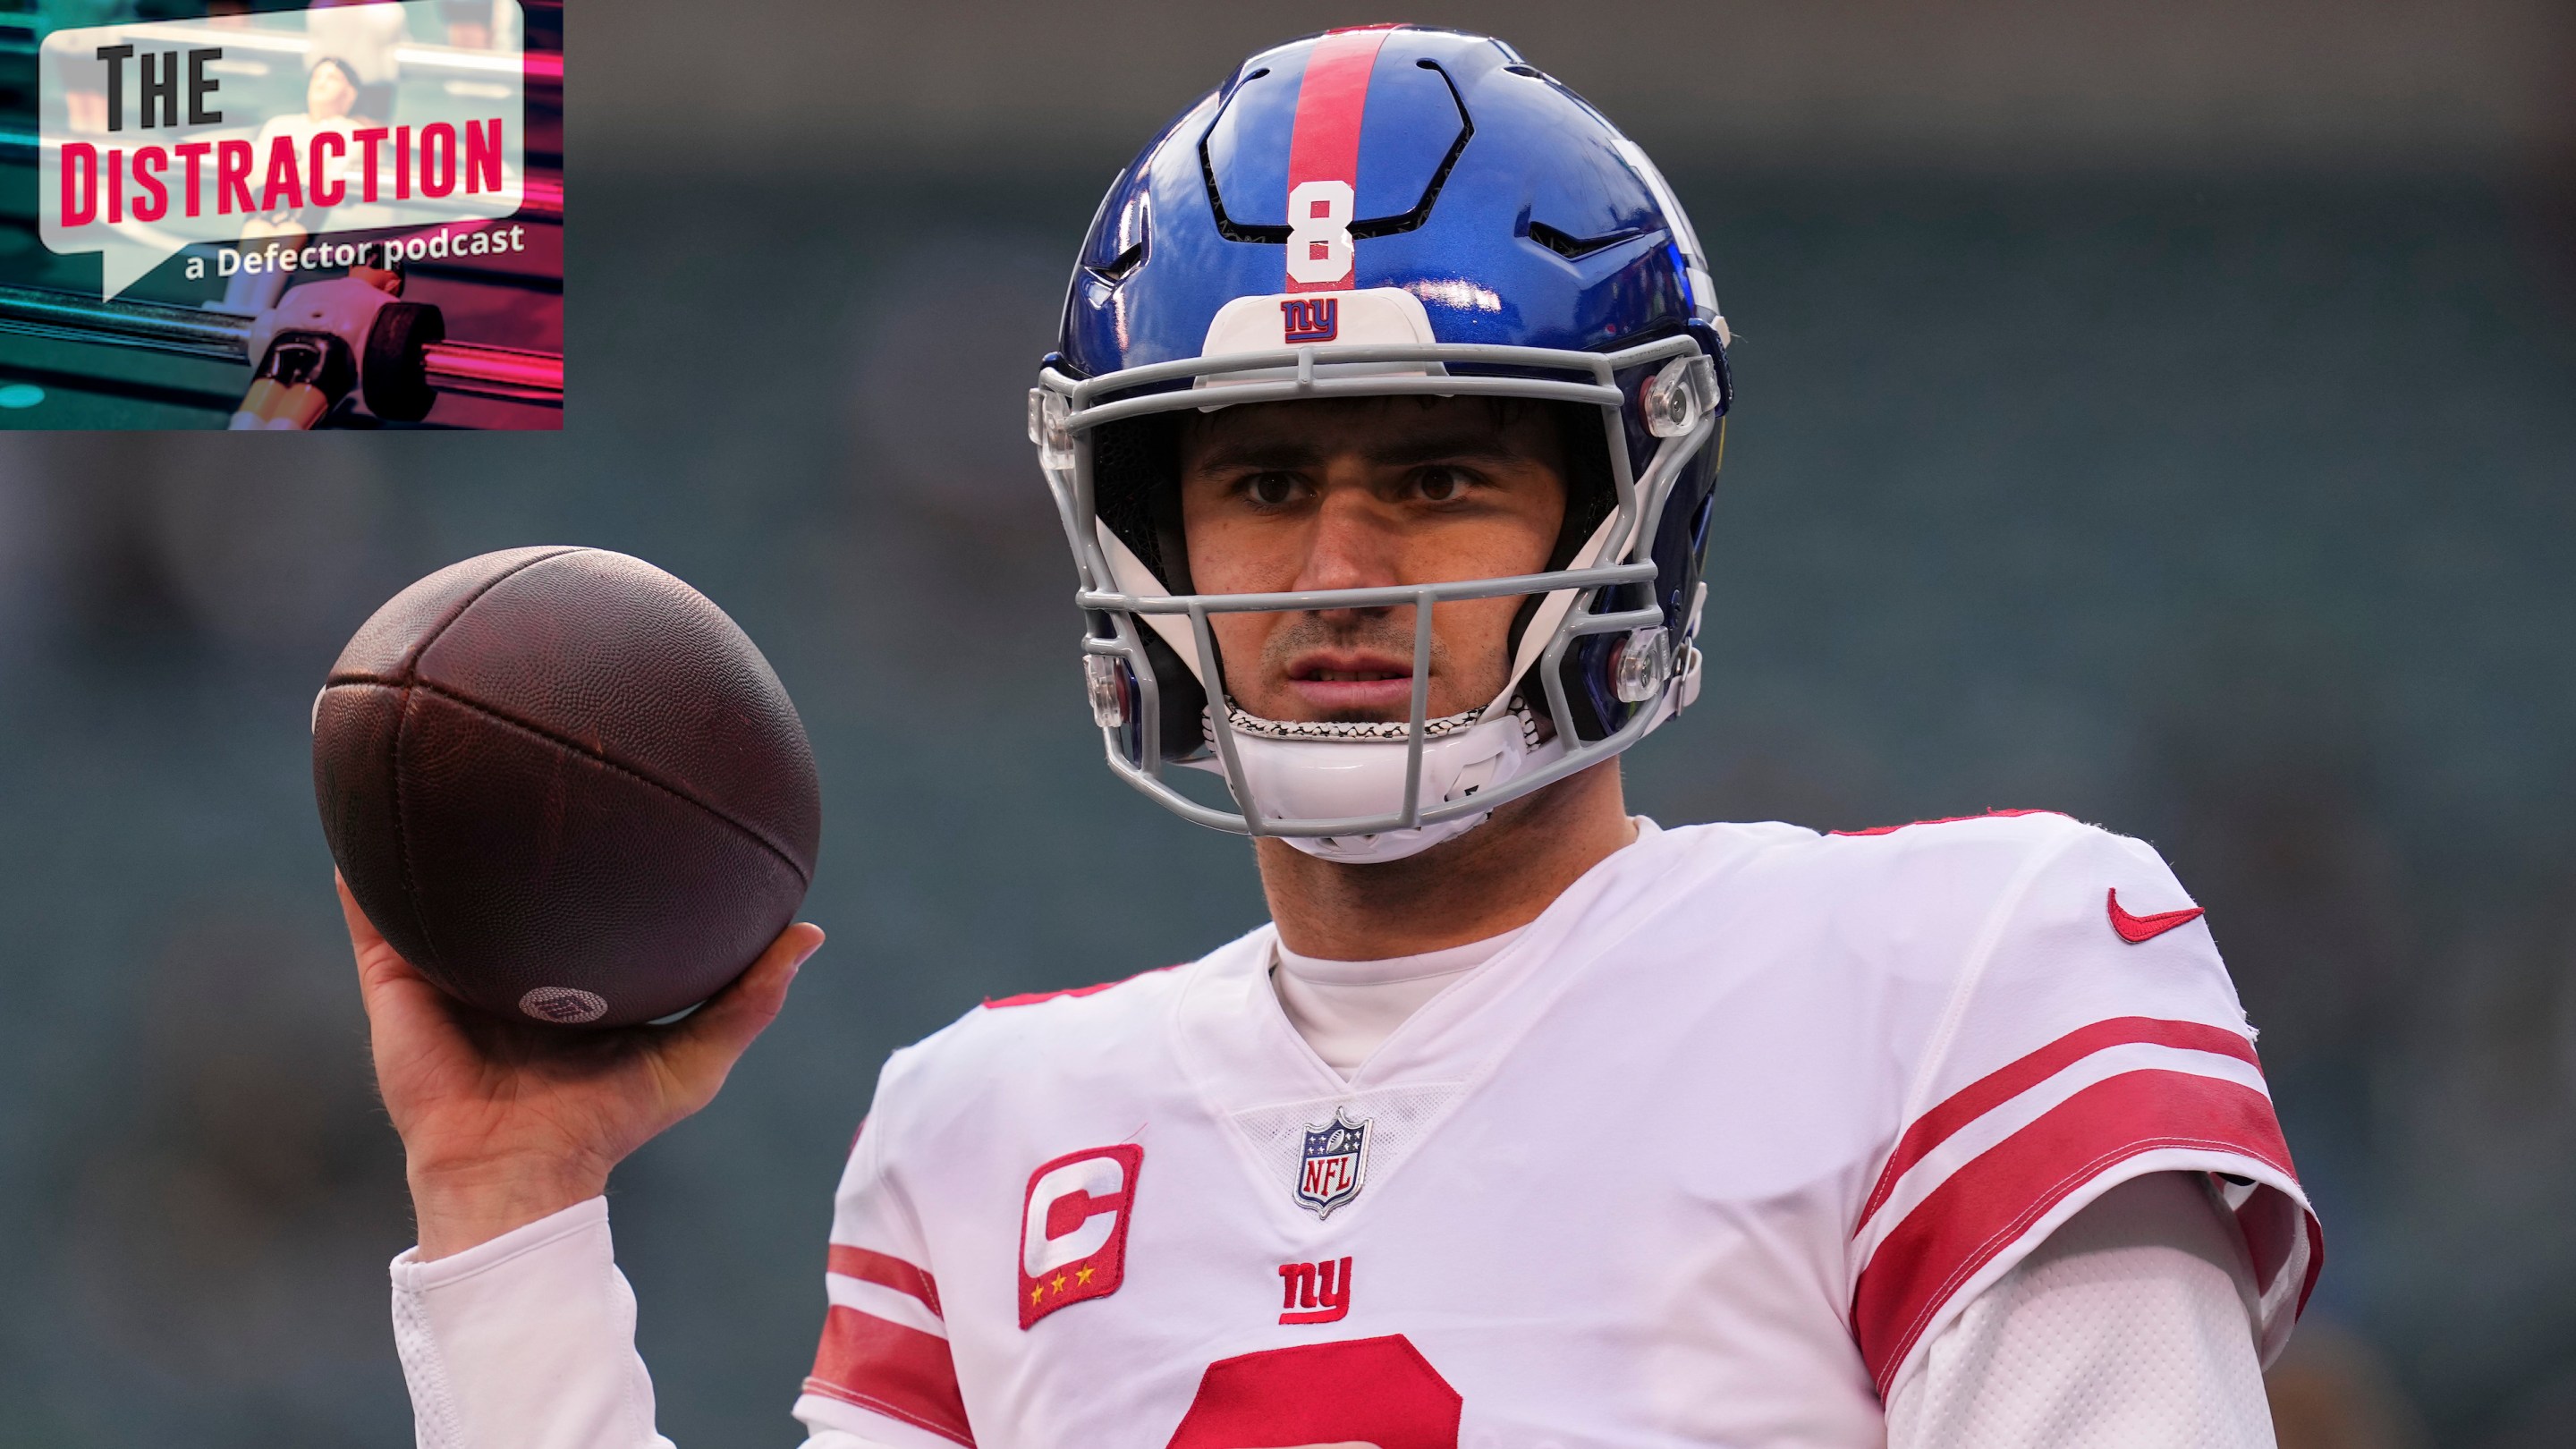 Daniel Jones looking confused and holding a football in a silly way before the Giants' Week 18 game against the Eagles.